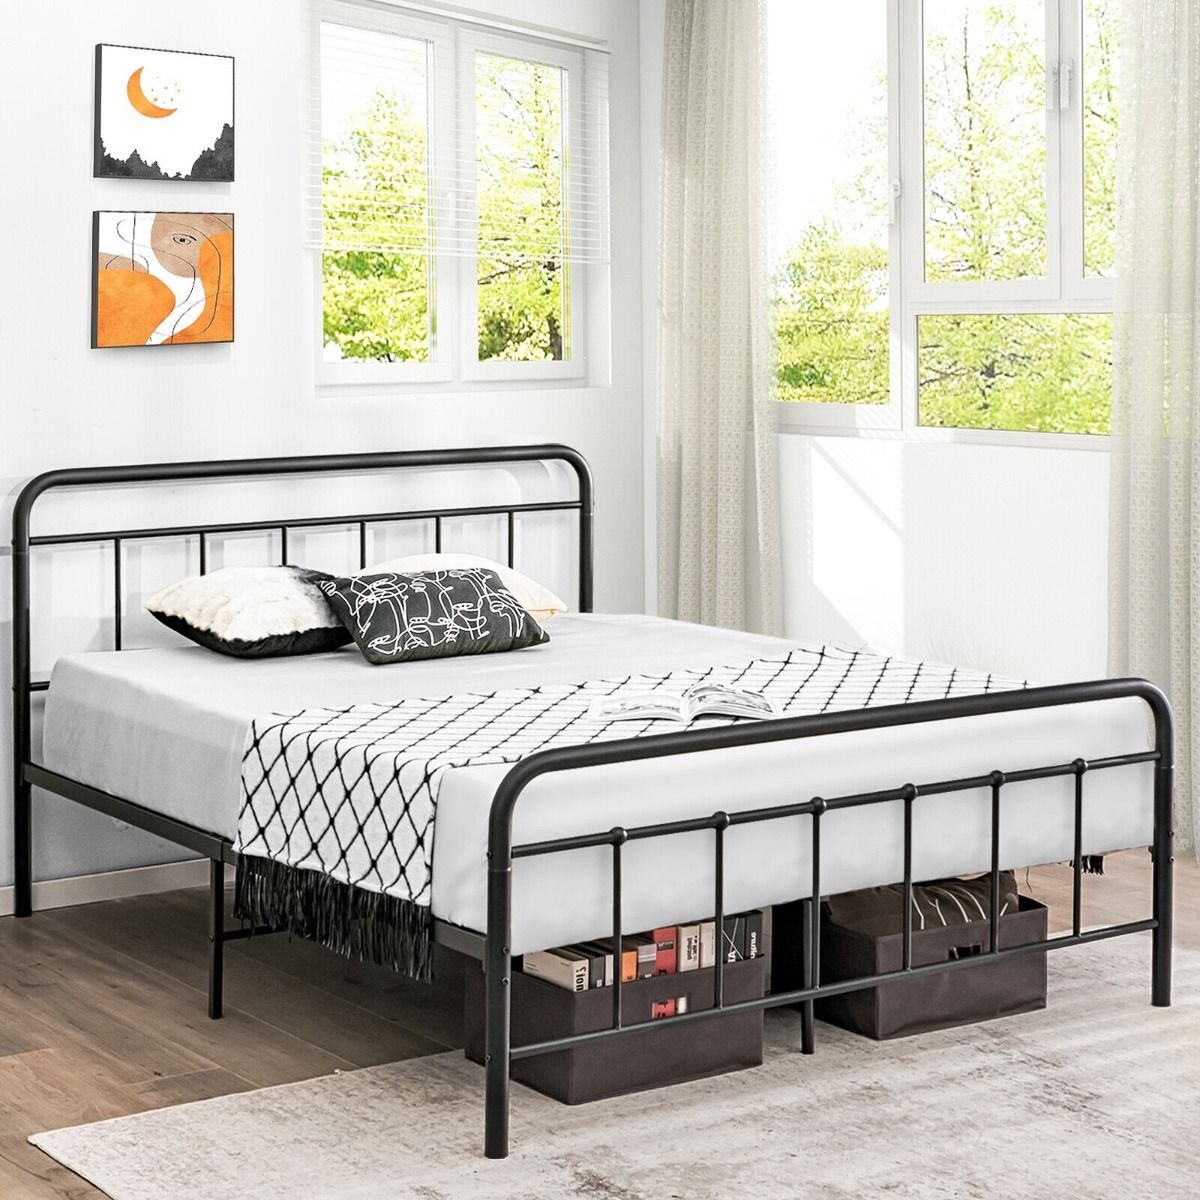 Modern King Size Double Slatted Bed Frame with Curved Headboard